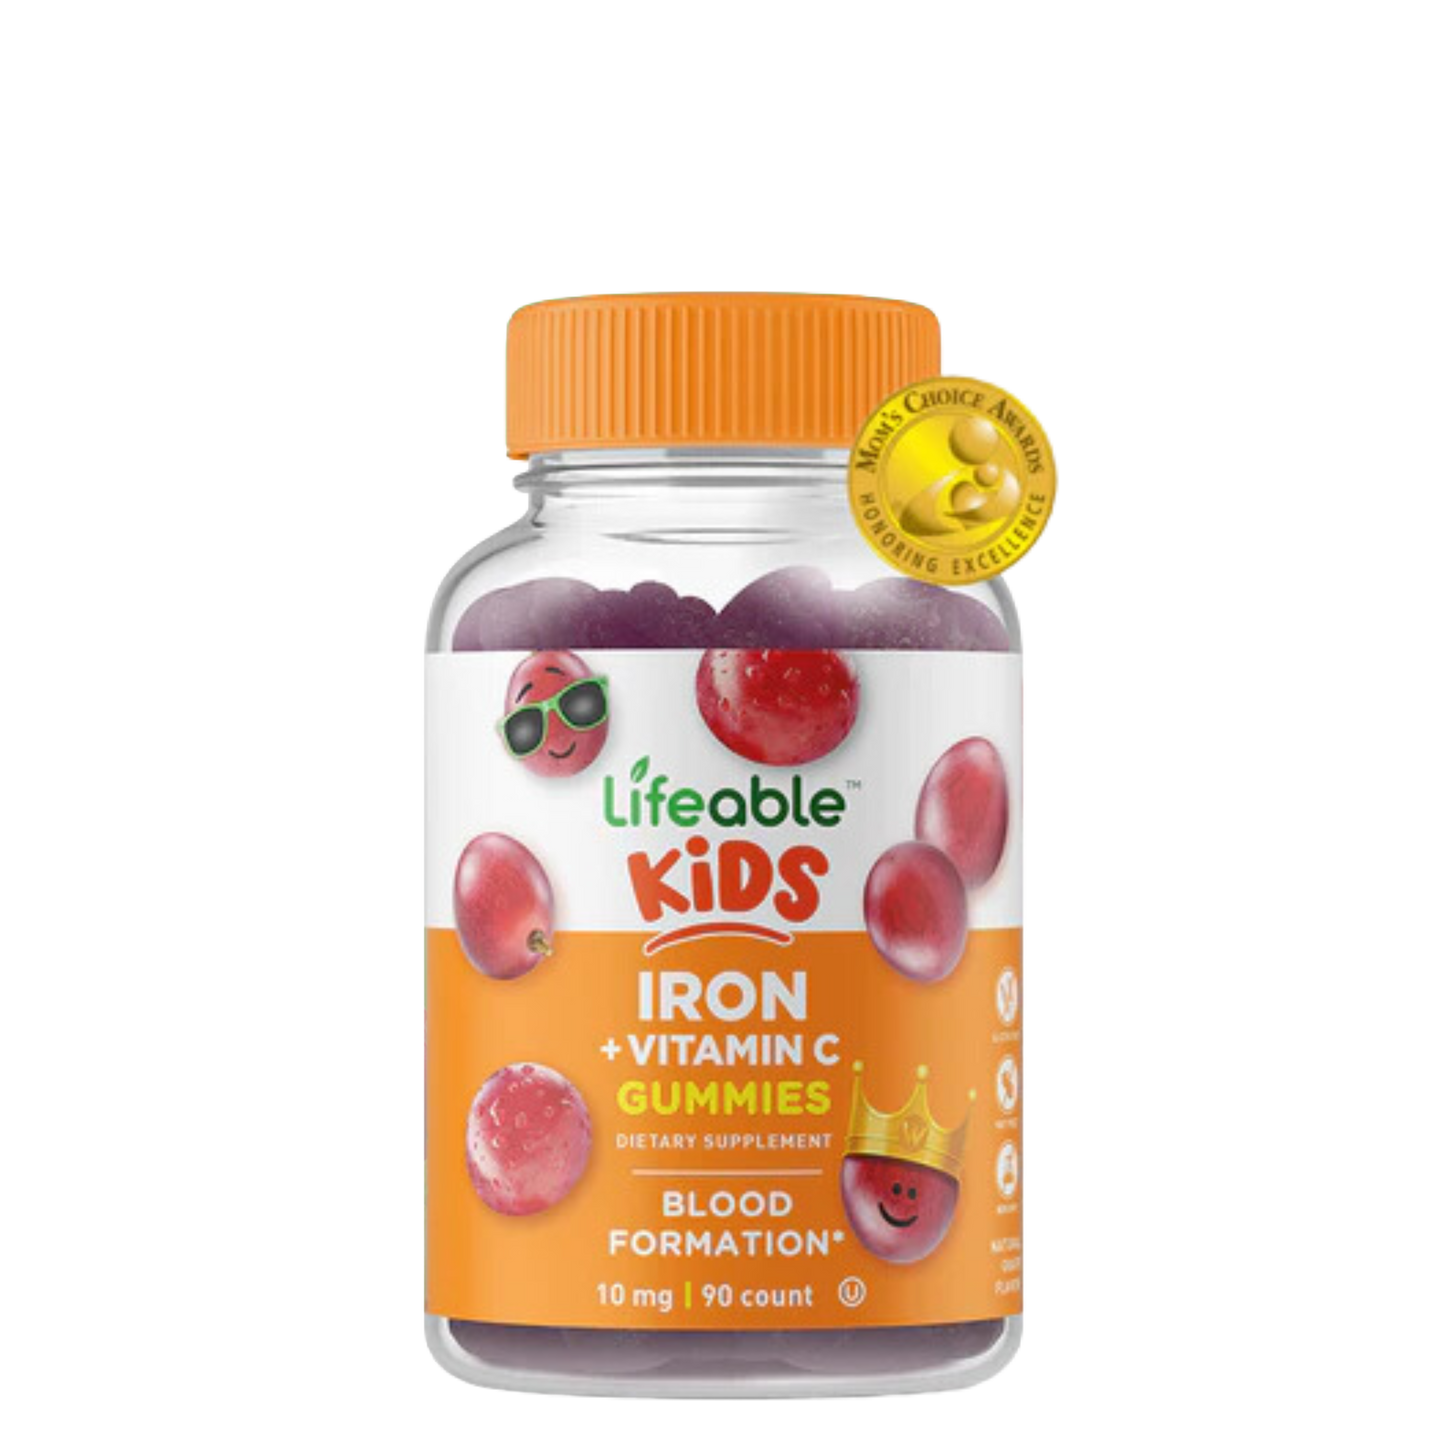 Iron and Vitamin C Gummies for Kids